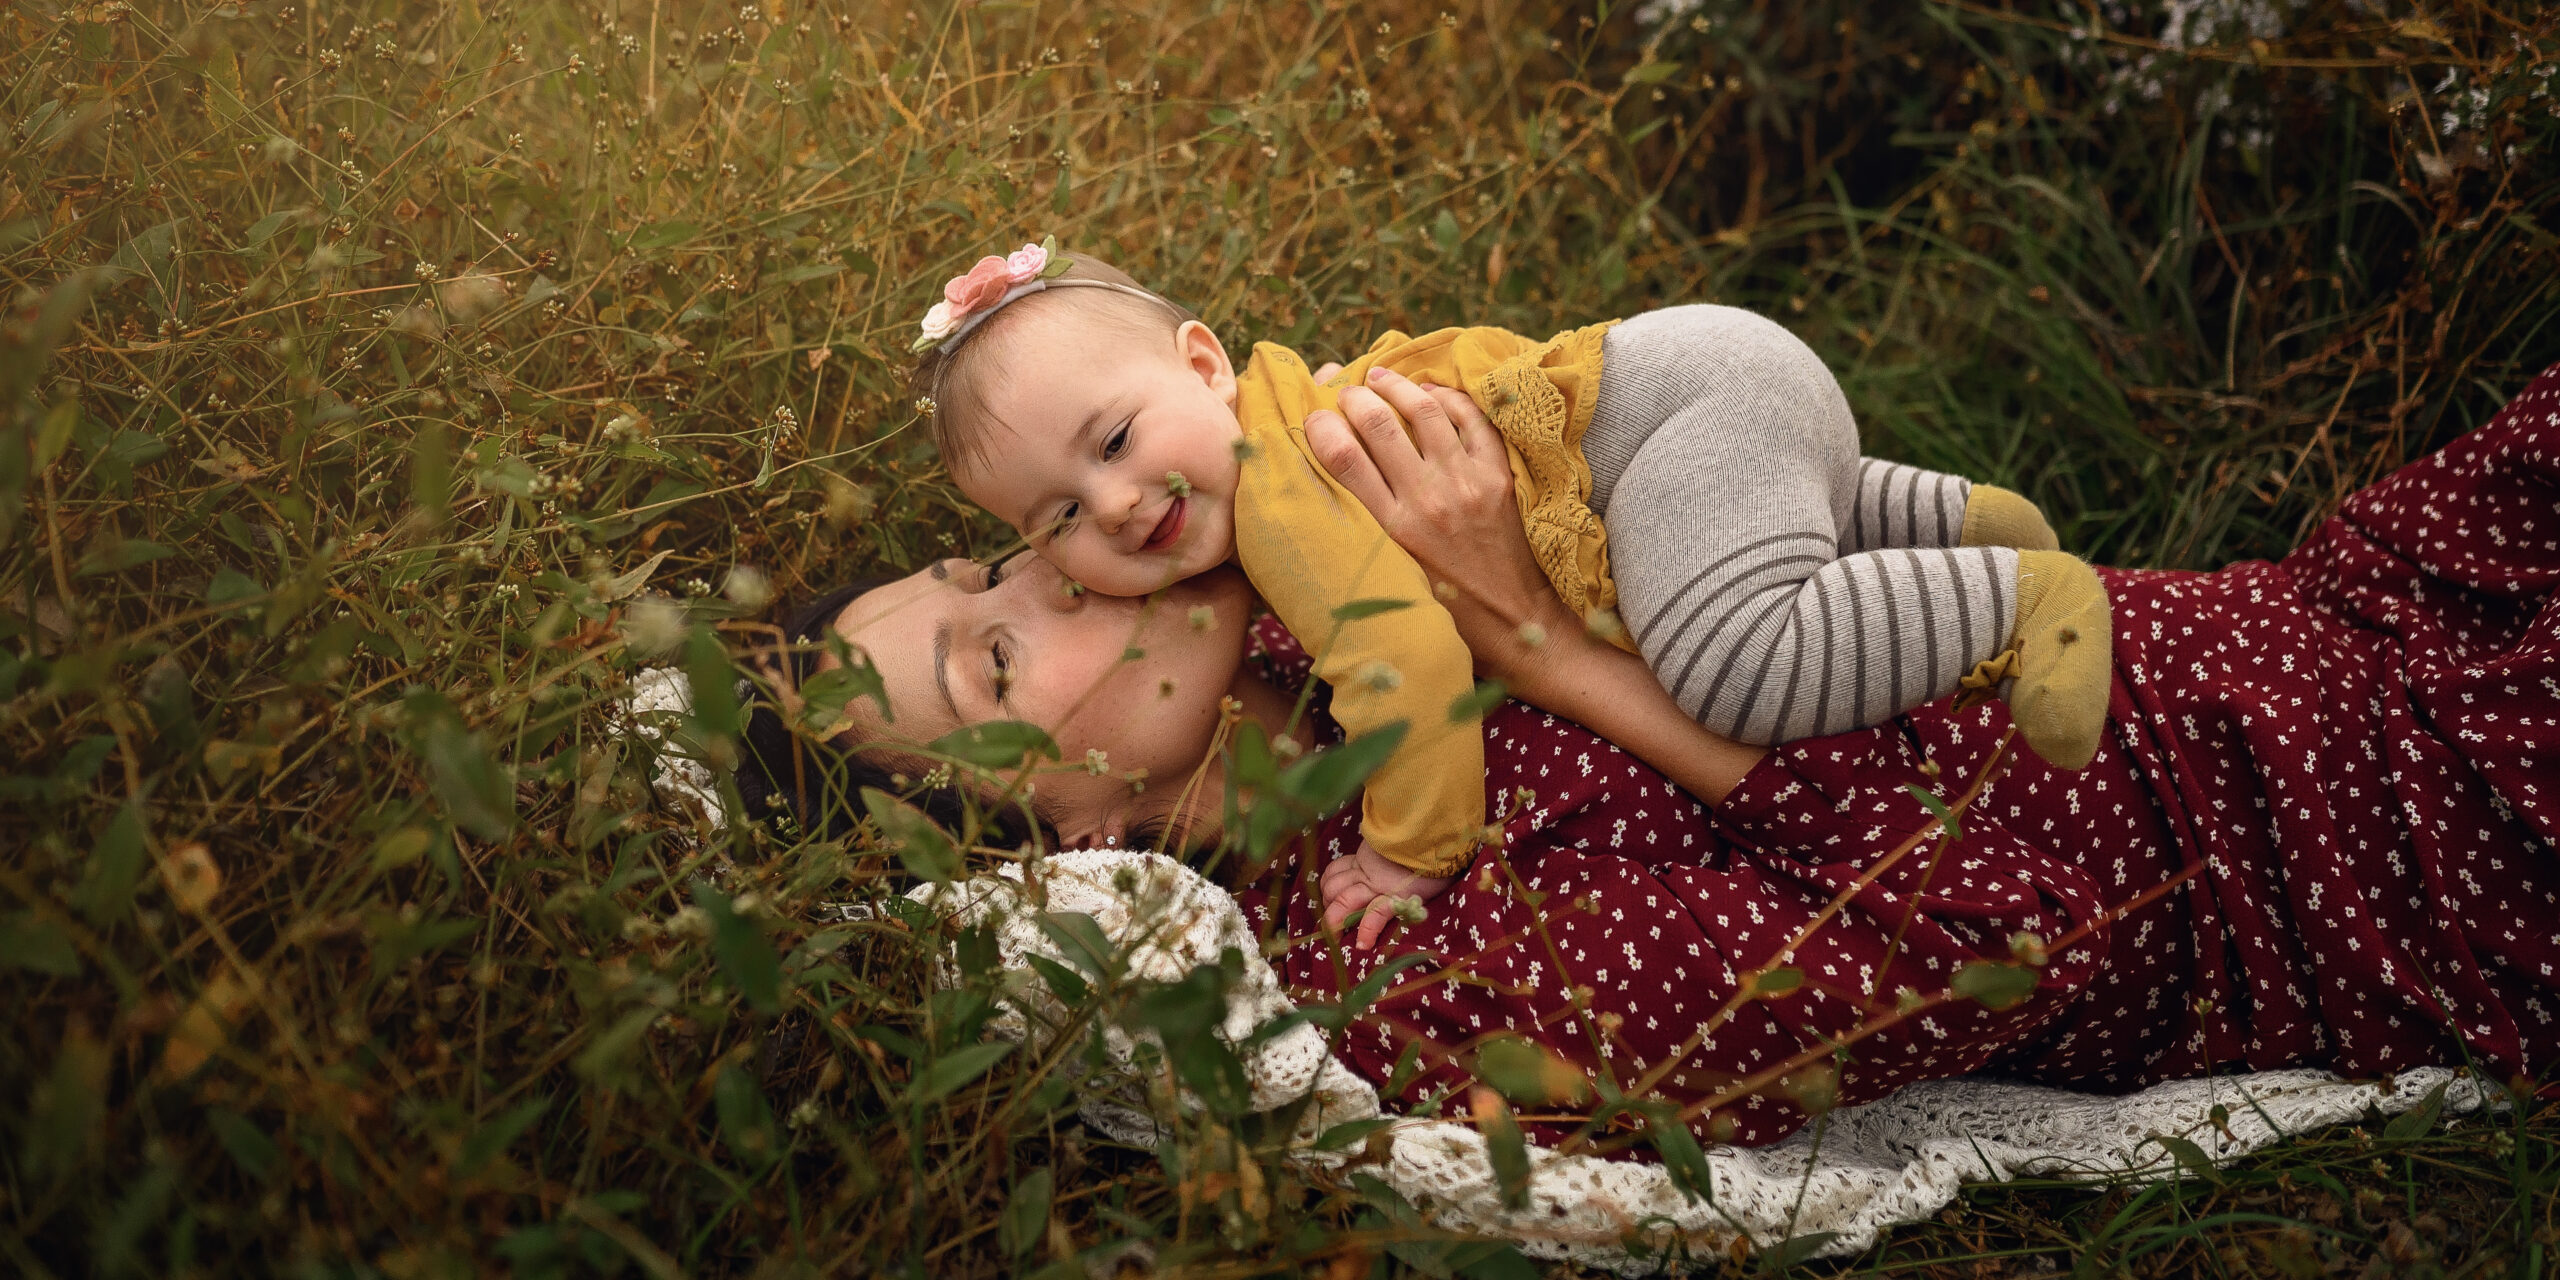 mother lies in a field wearing a red dress and holding her little baby girl in an embrace